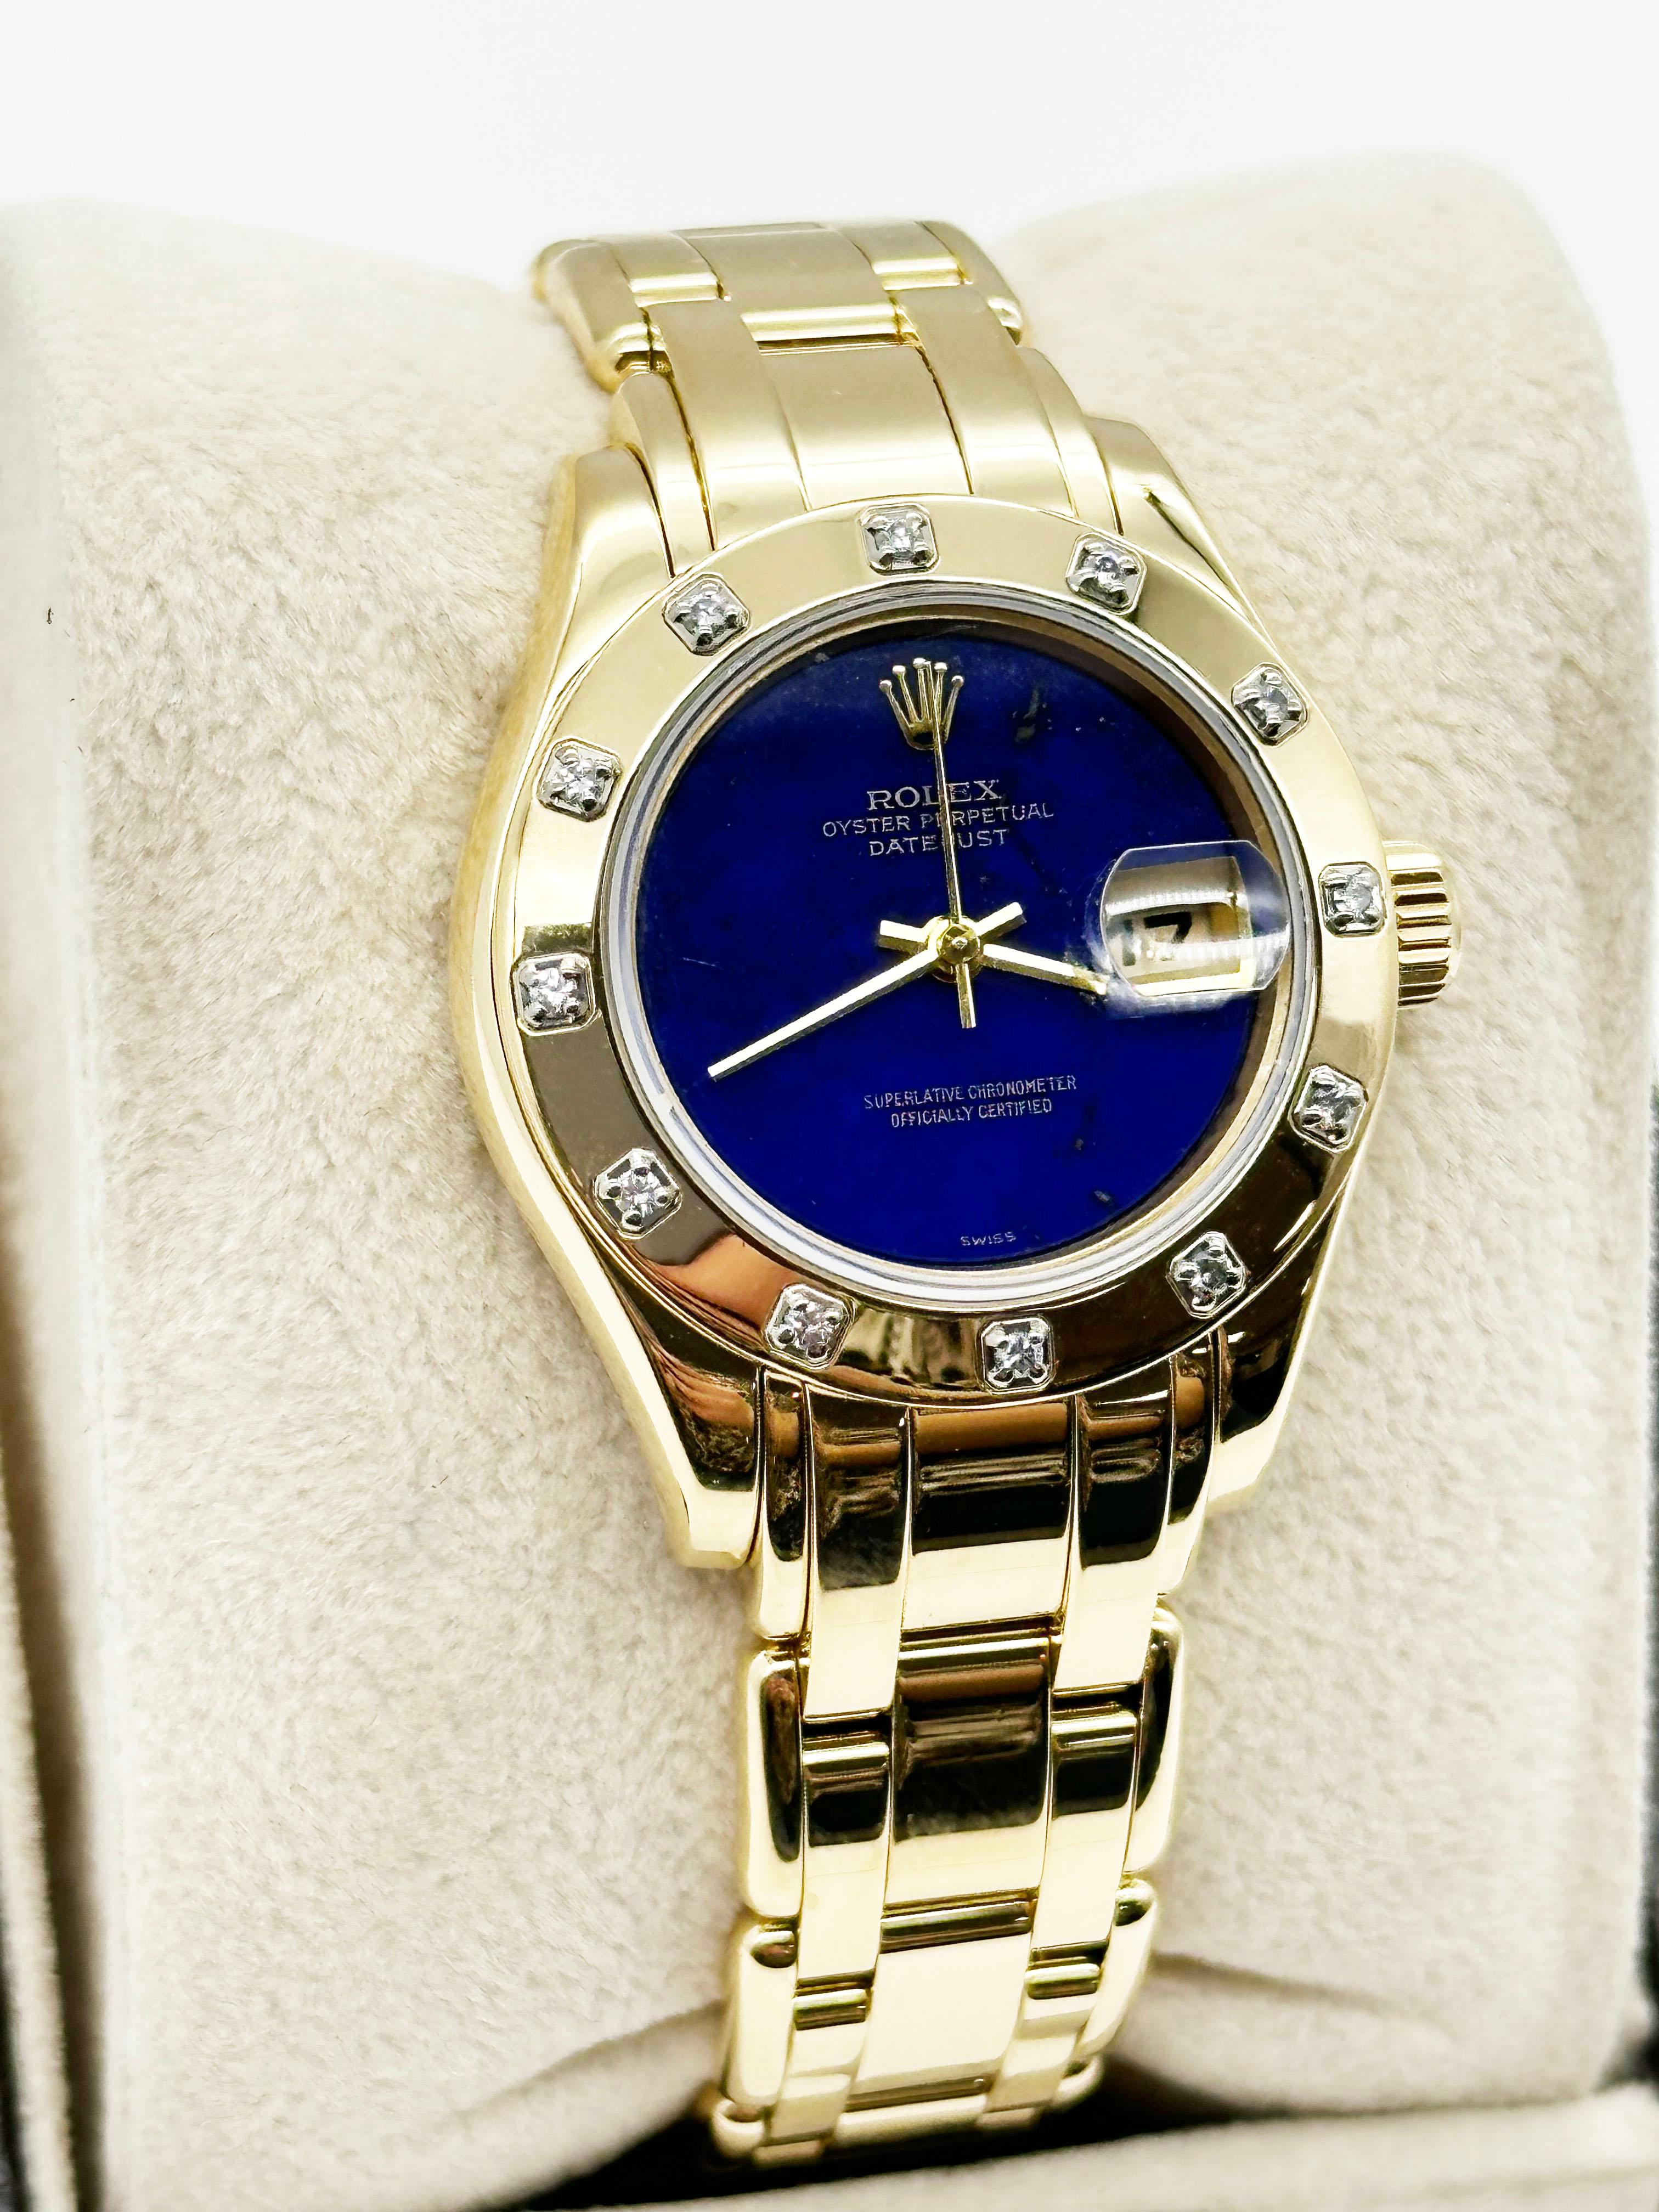 
Style Number: 69318



Serial: W033***



Year: 1995

 

Model: Ladies Pearlmaster

 

Case Material: 18K Yellow Gold

 

Band: 18K Yellow Gold

 

Bezel: 18K Yellow Gold

 

Dial: Original VERY RARE Lapis Lazuli Dial 

 

Face: Sapphire Crystal 

